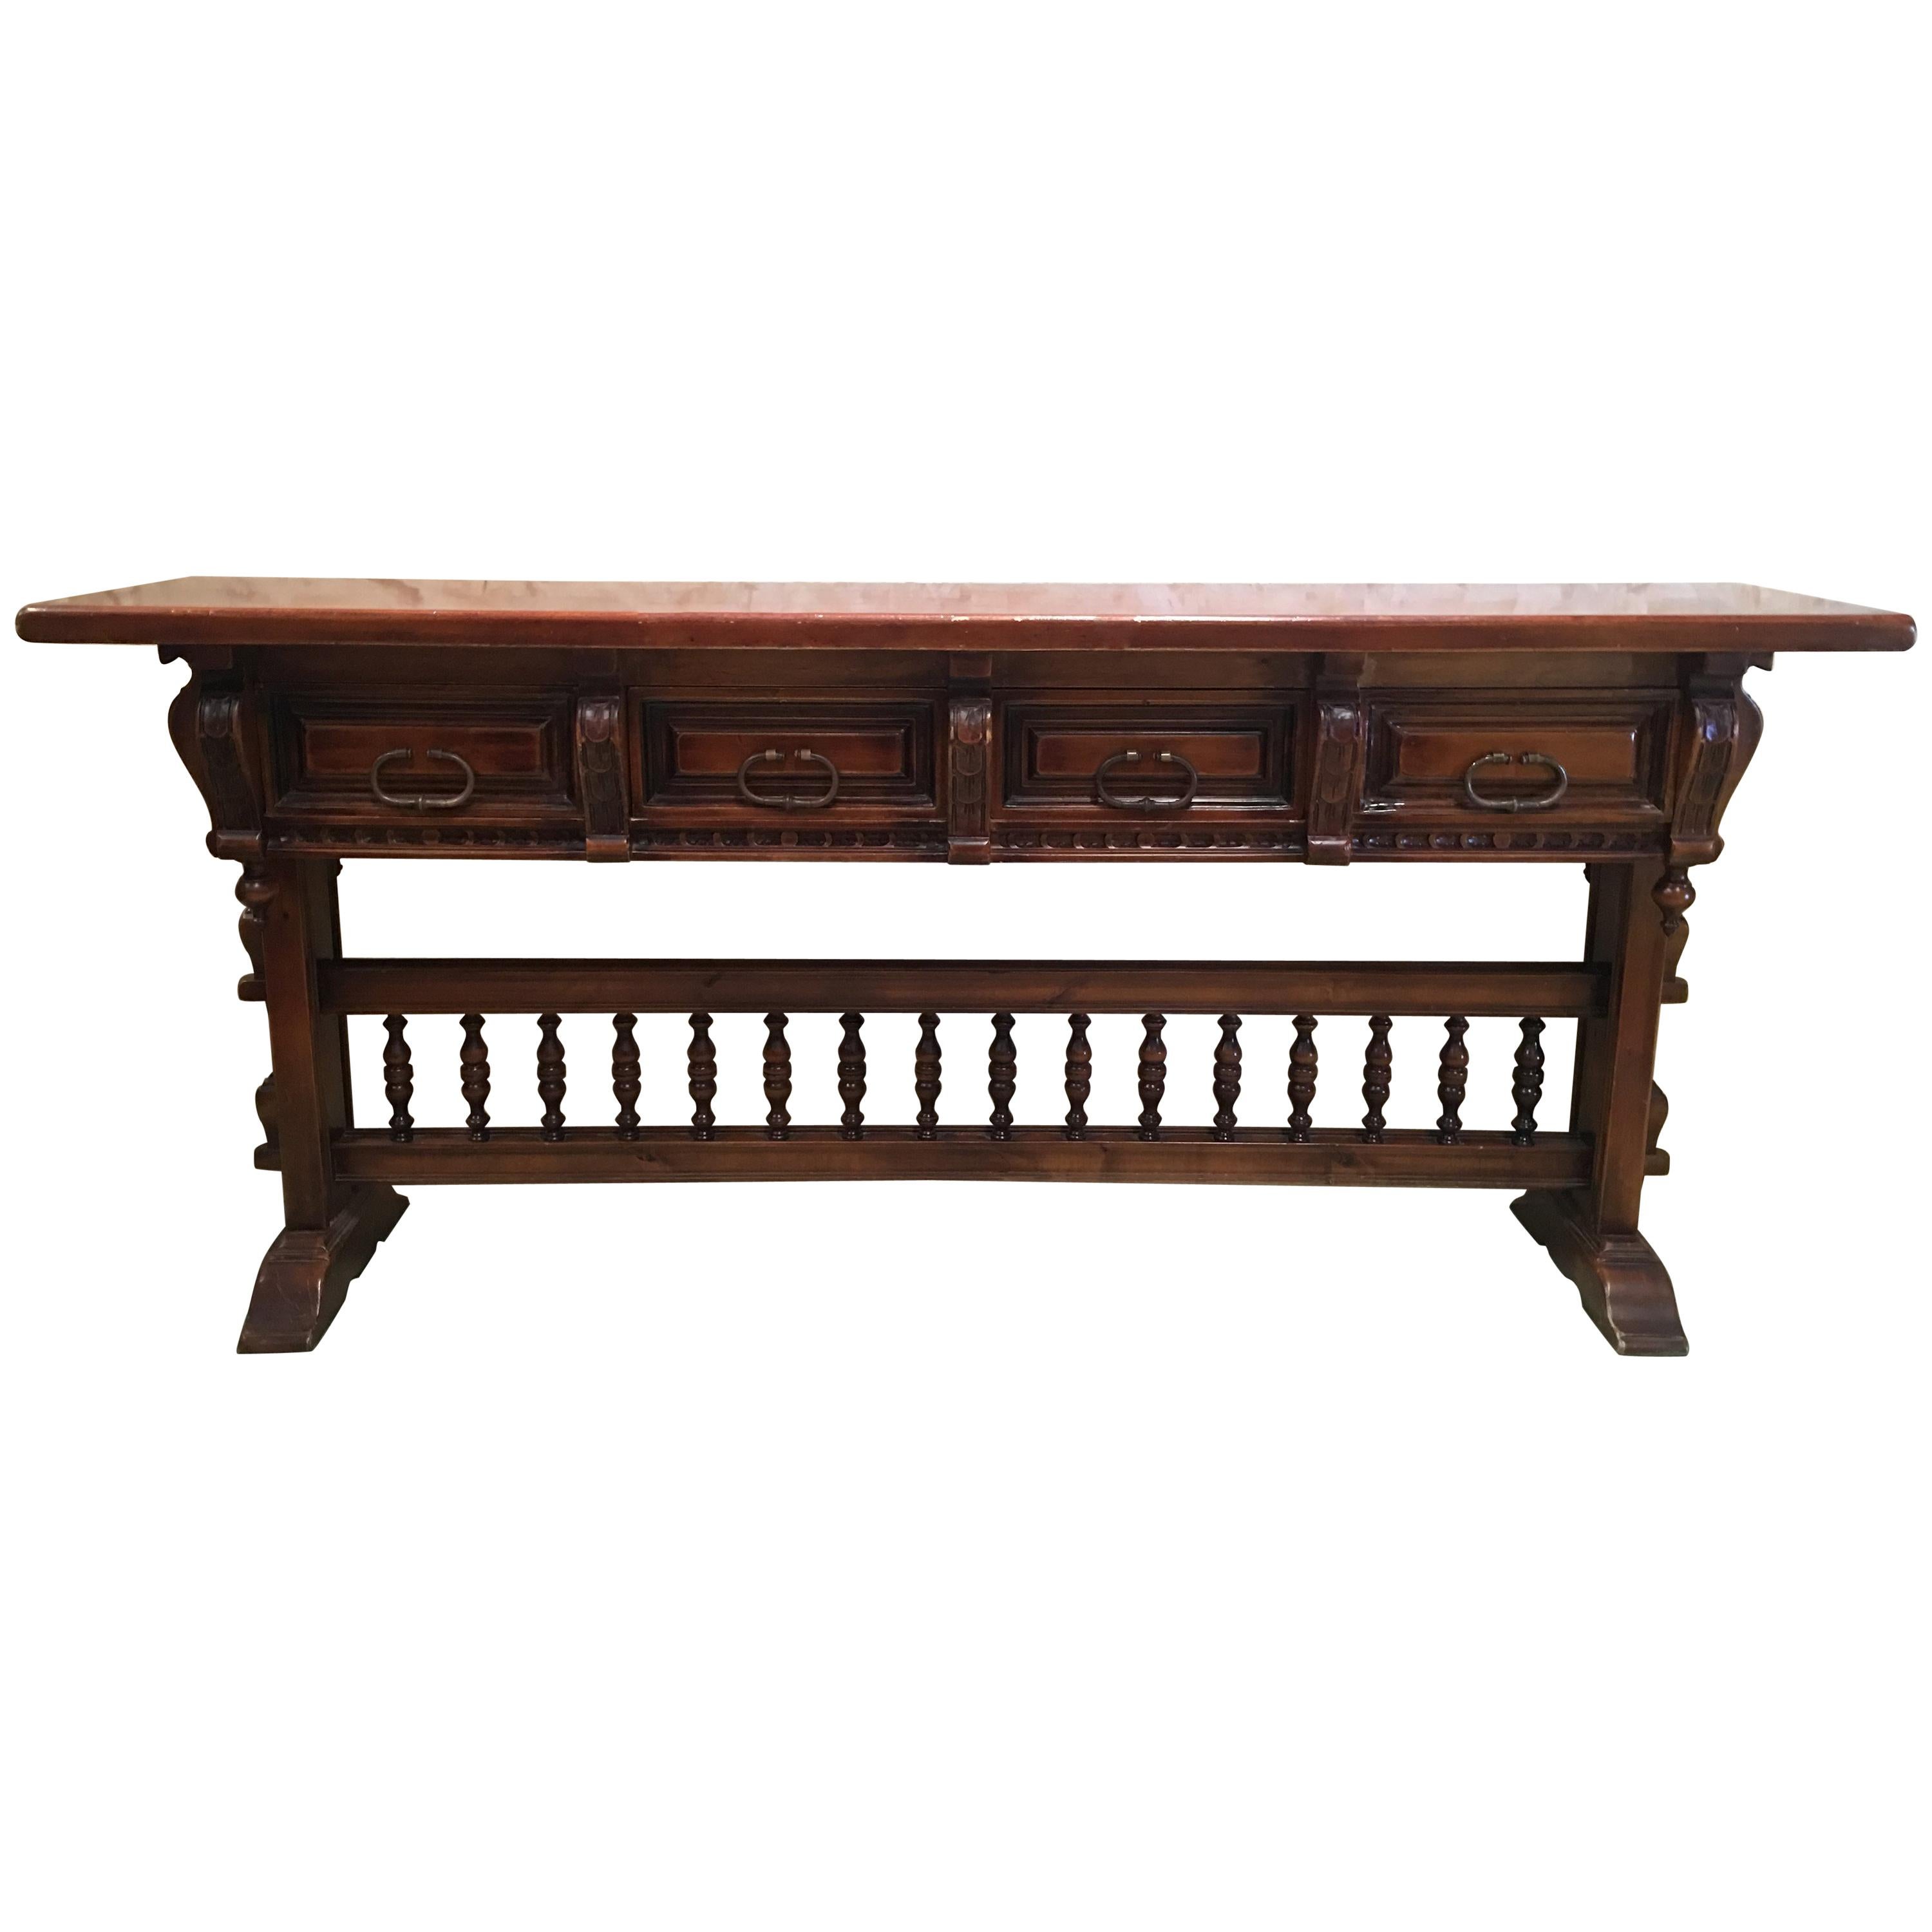 18th Baroque Console Table in Walnut with Four Carved Drawers and Stretcher